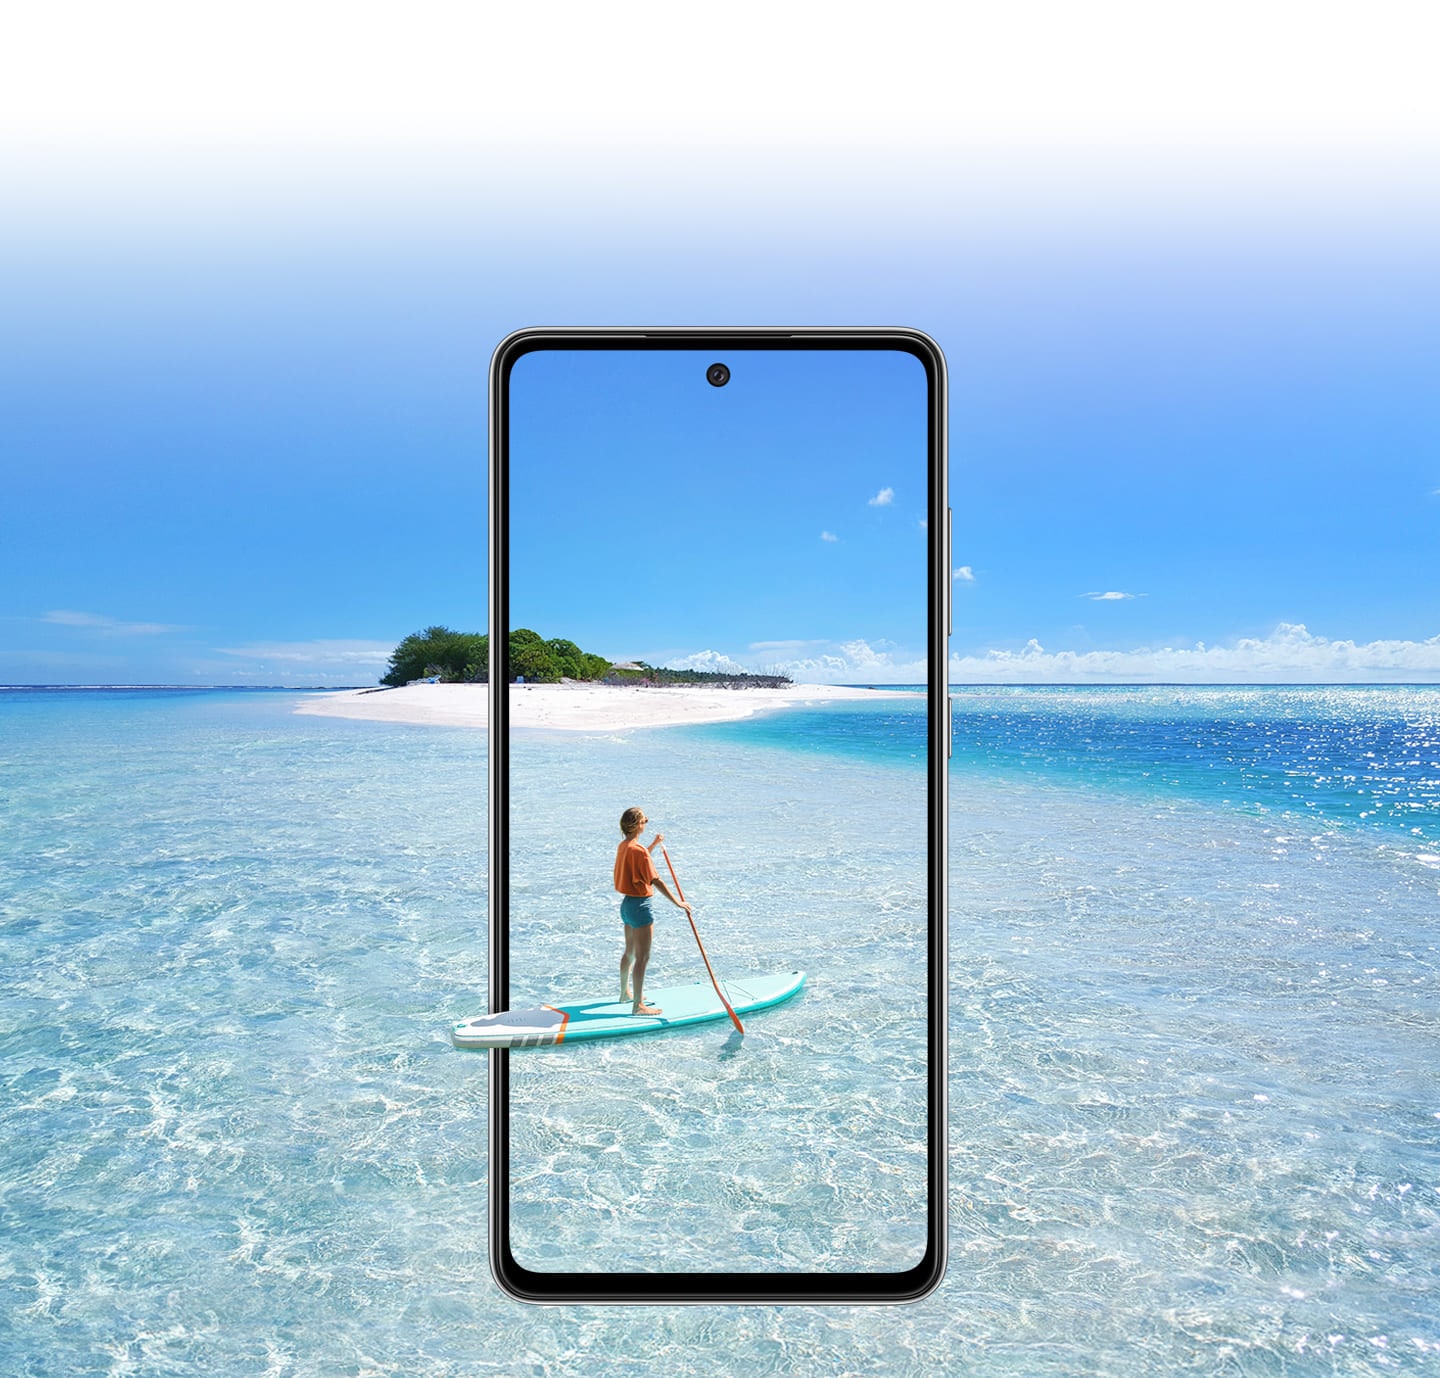 Galaxy A52s 5G seen from the front. Behind the phone and inside the display is a scene of a body of water and a small island. On the phone's screen is a person paddleboarding, and their paddleboard extends slightly outside the boundaries of the phone to represent the screen's immersive view. Text says Super Smooth, Brightness 800 nits and Eye Comfort Shield, with the SGS logo.